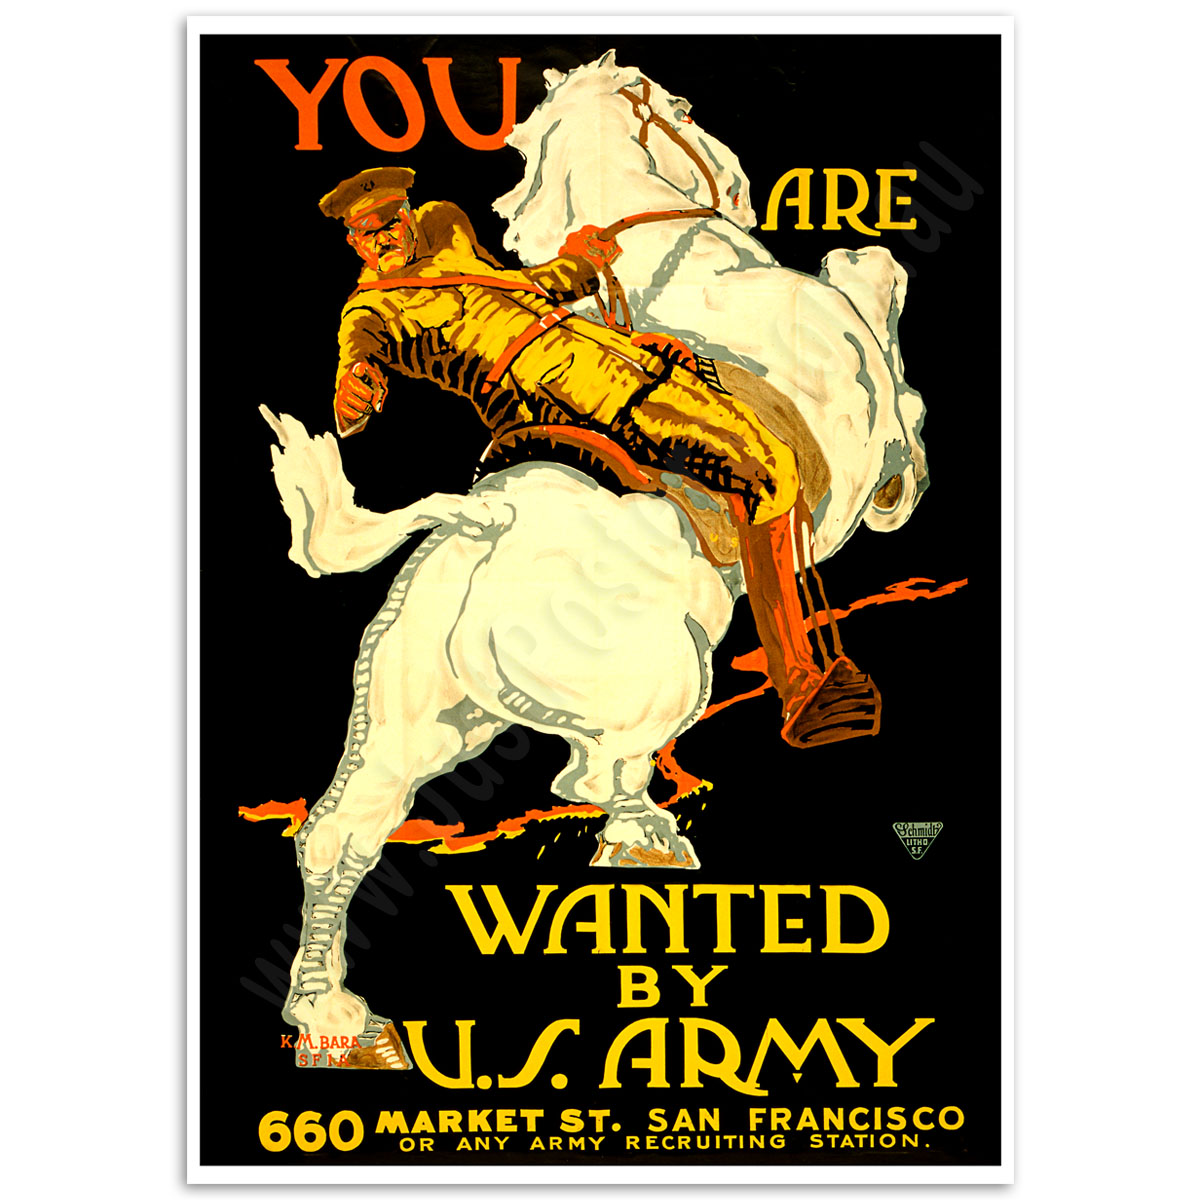 WW1 Recruitment Poster - Wanted by the US Army